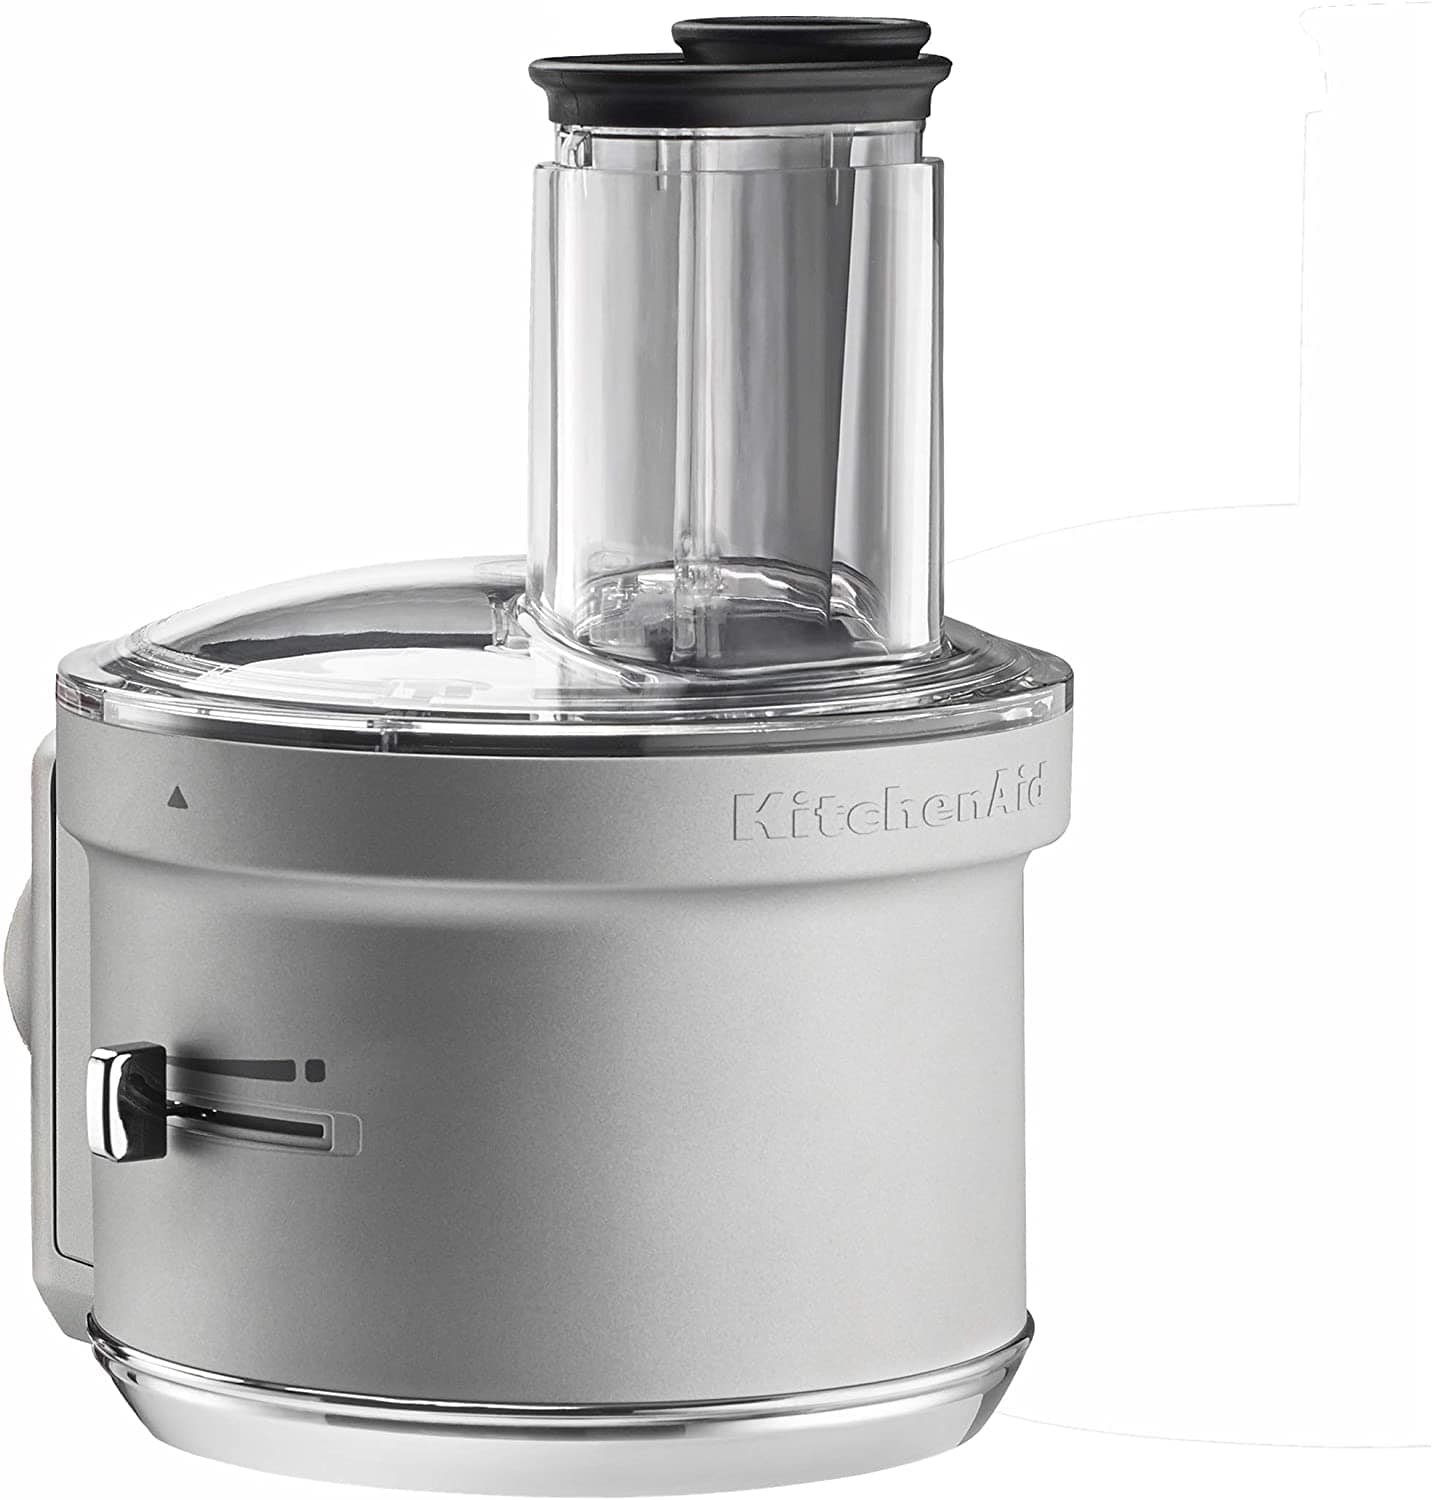 https://cdn.shopify.com/s/files/1/0473/5398/7229/products/kitchenaid-kitchenaid-food-processor-attachment-with-dicing-feature-23234-29857579991200_3f3ed72c-7b14-4a45-bf50-6b57356f23c5_1600x.jpg?v=1662139487